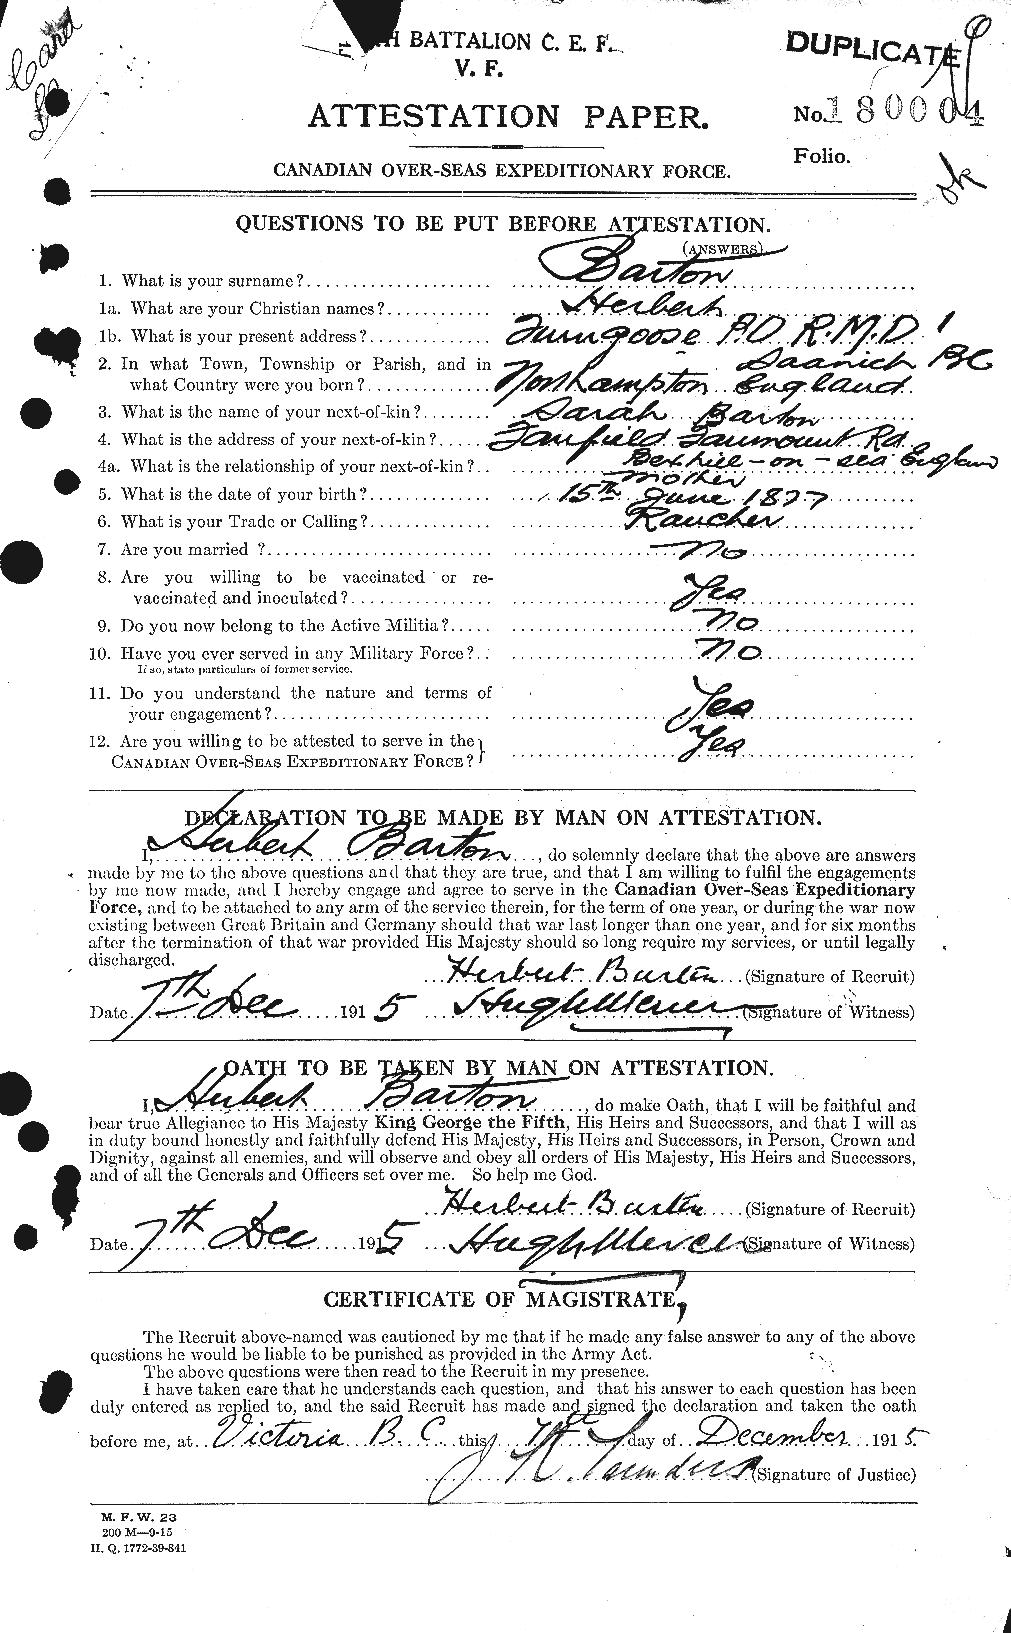 Personnel Records of the First World War - CEF 221639a